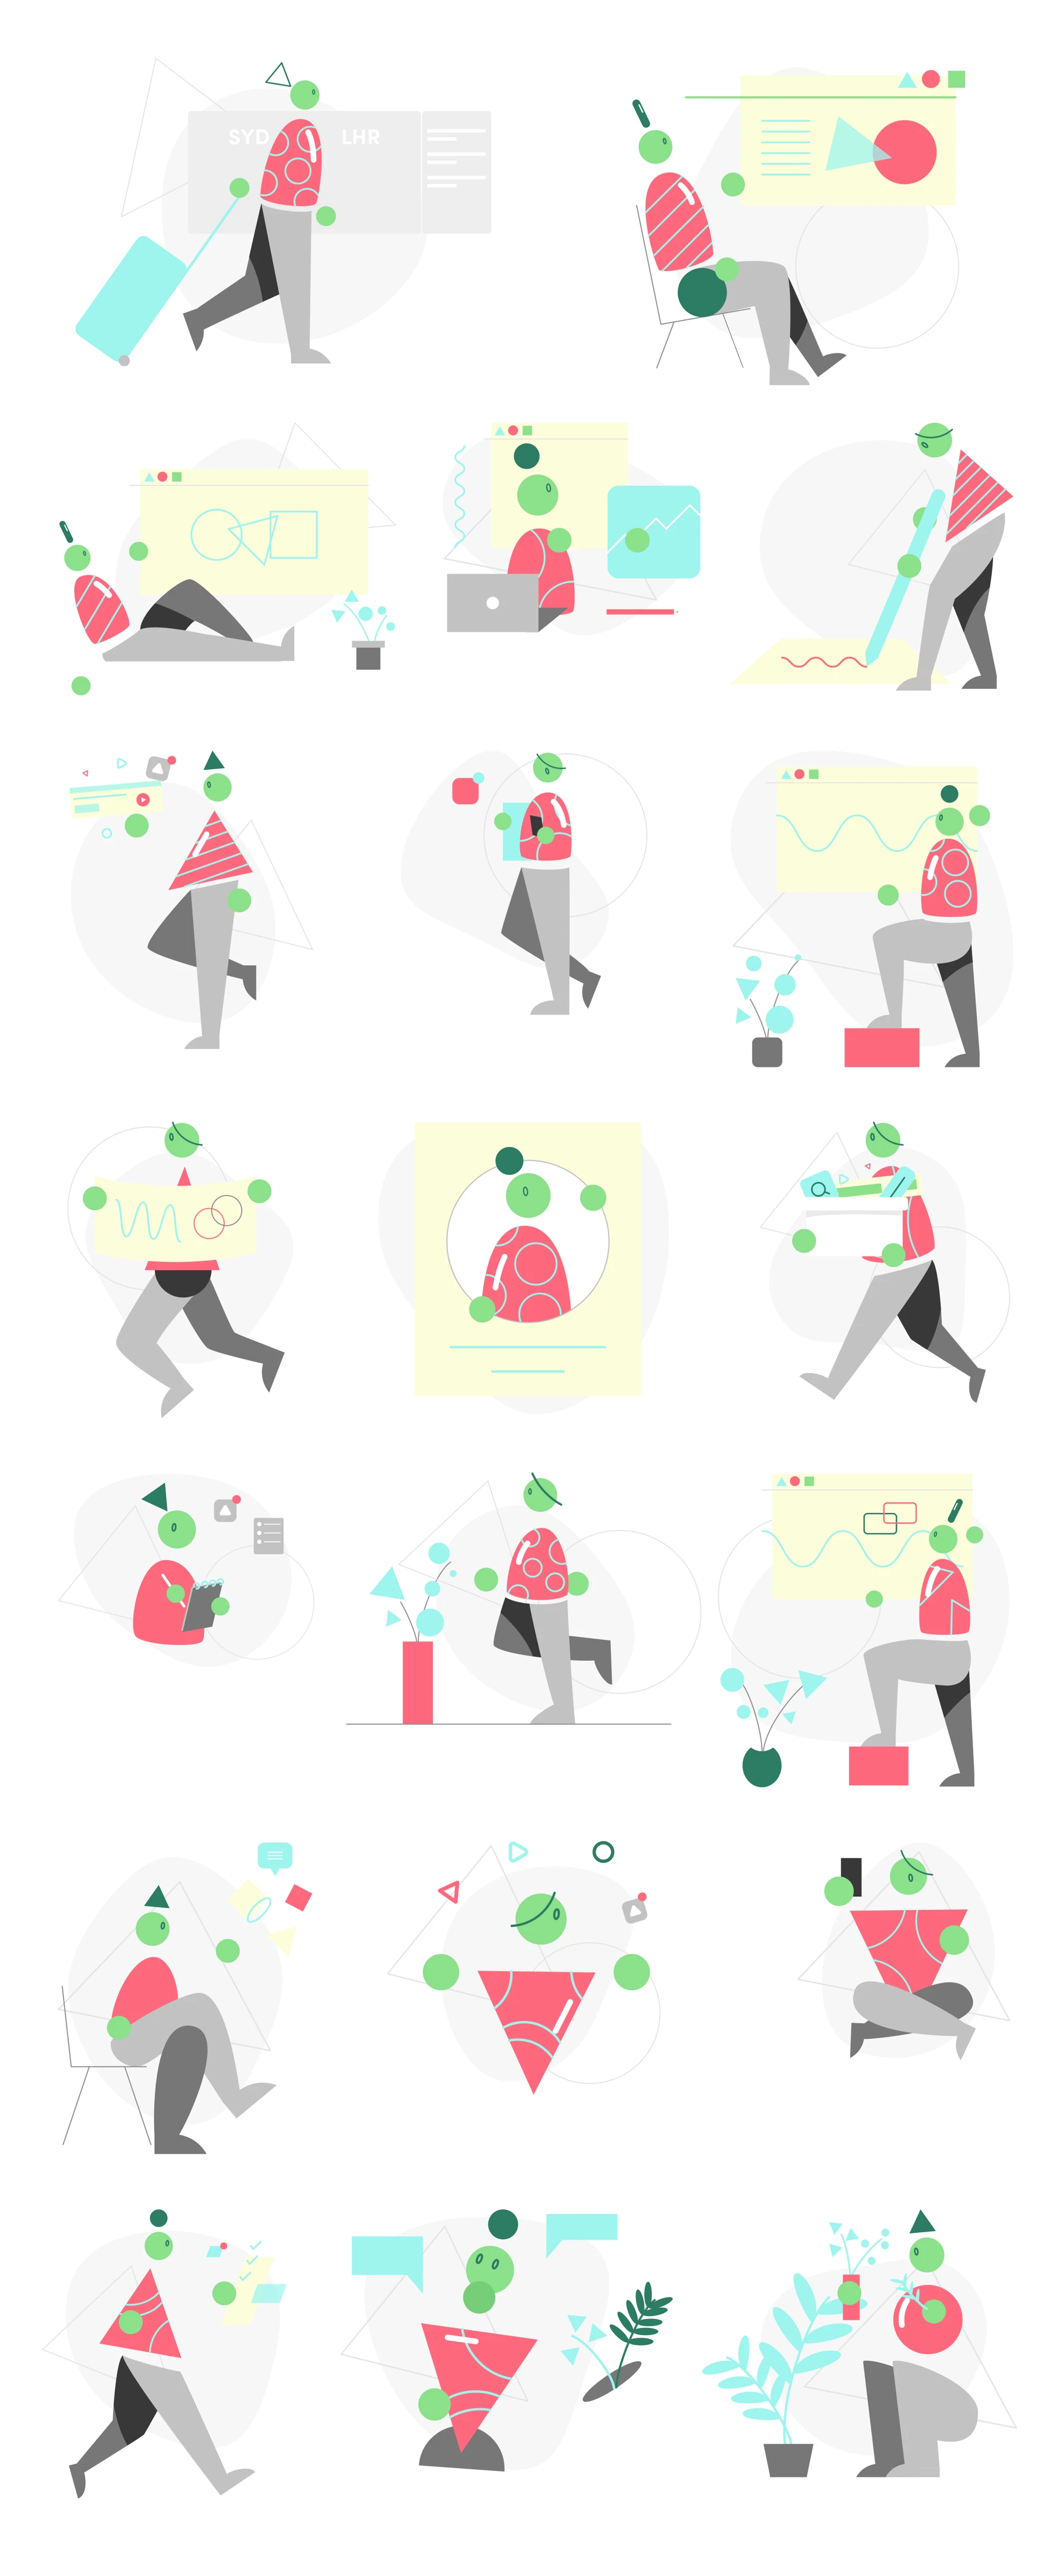 Watermelon Free Illustrations - 20 creative, abstract illustrations featuring interesting characters and motions, ready to make your next startup, website, or project shine.‍ Every illustration in this pack is a 100% vector SVG and can be scaled to any size. Everything can be customised, from colour, to layouts, to backgrounds, scenes, devices, characters, and more, using any vector editing program.